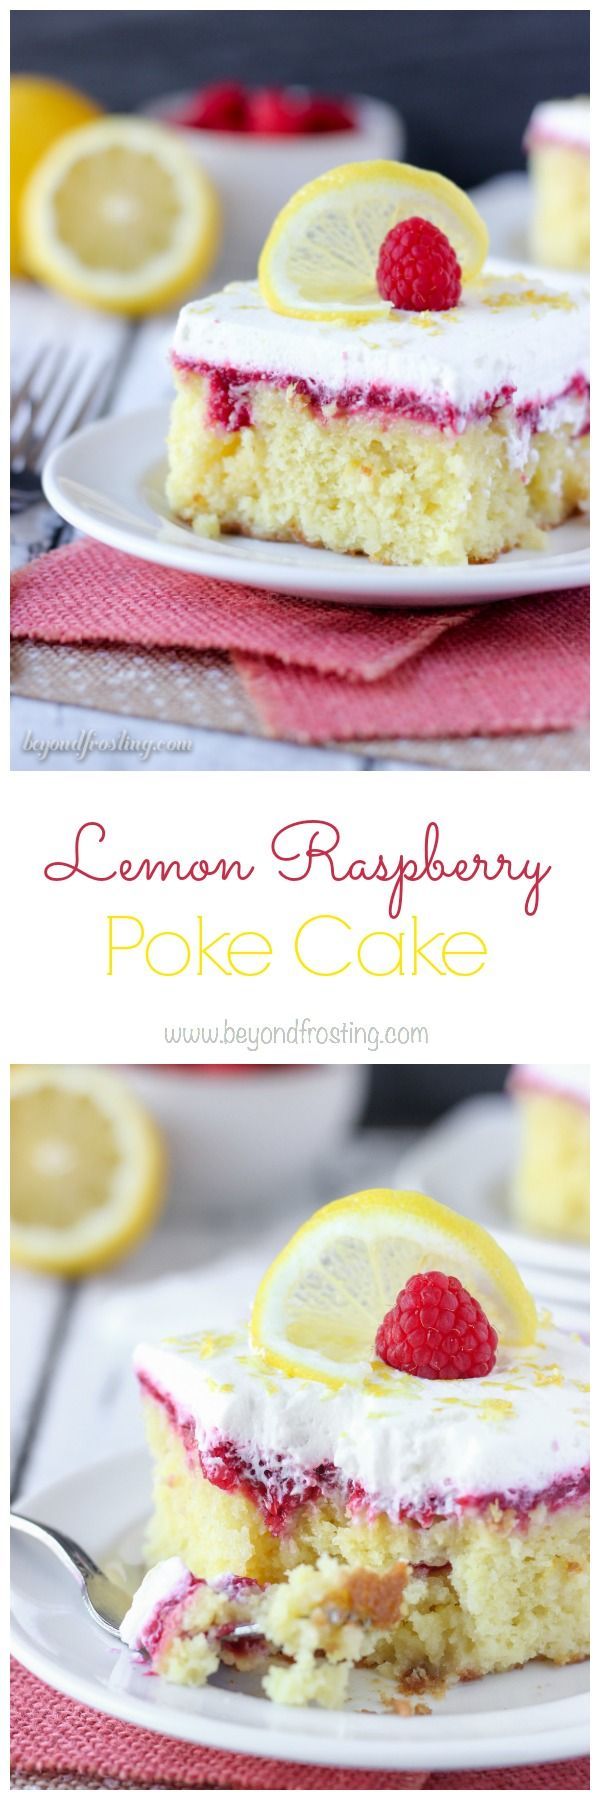 This quick and easy Lemon Raspberry Poke Cake will be your next favorite summer cake. Poke cakes make a great potluck dessert.